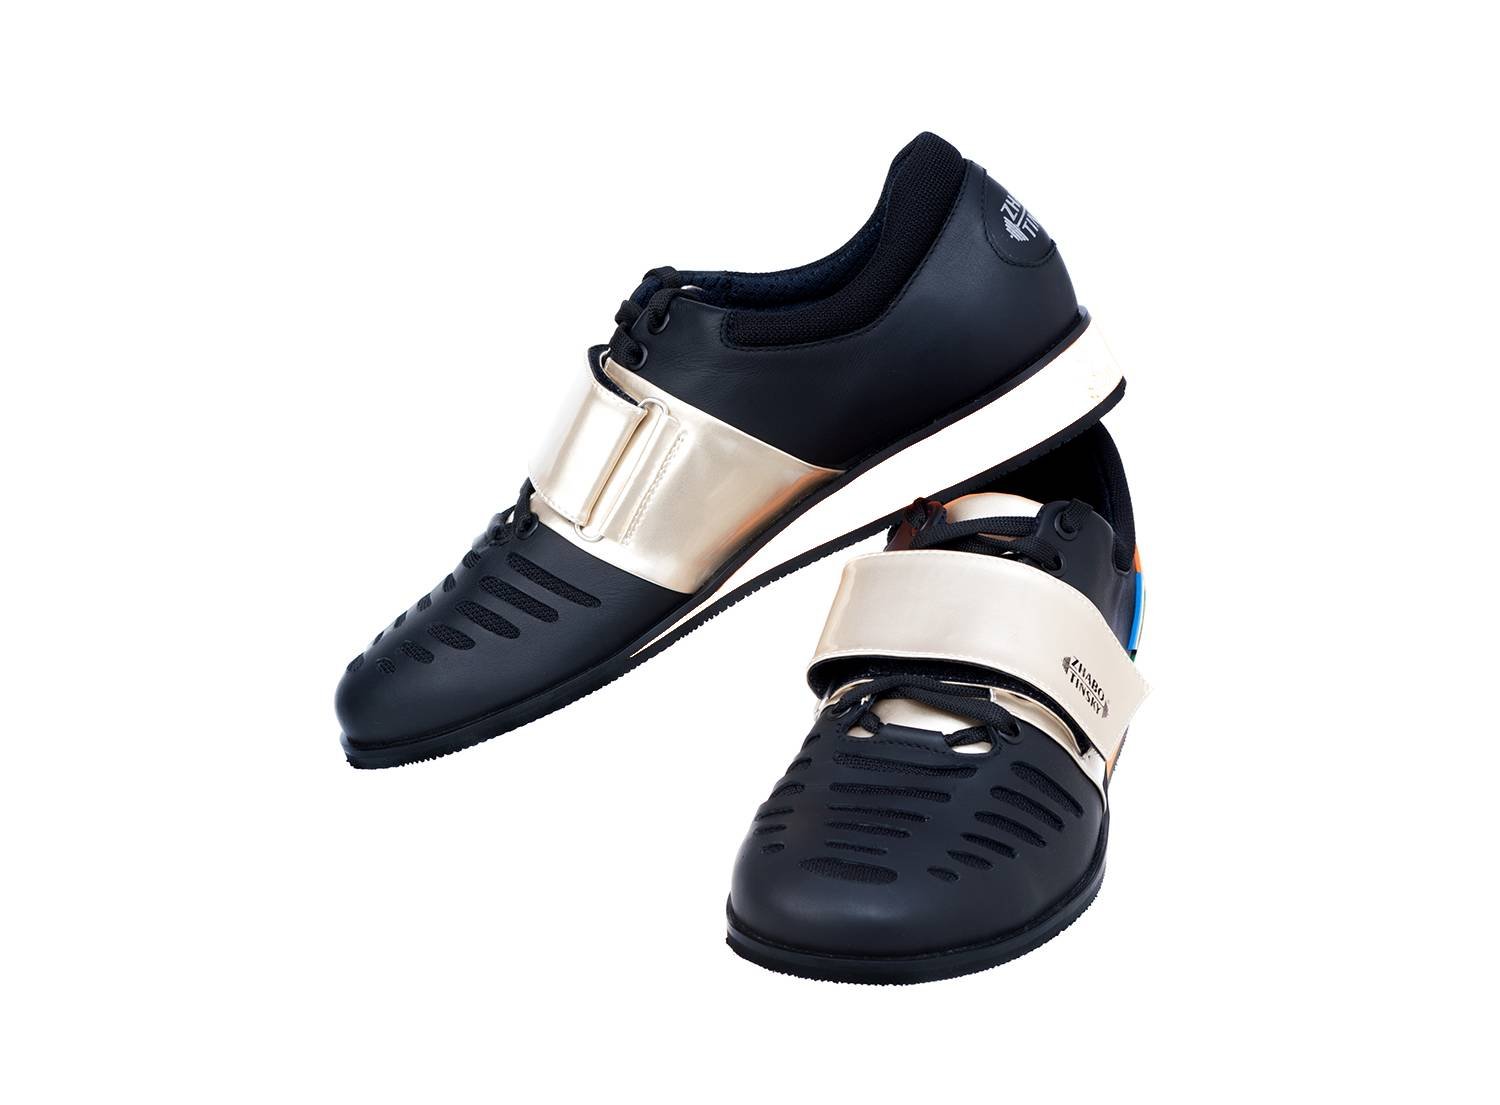 Weightlifting shoes Lux Platina, 43 size (UKR)